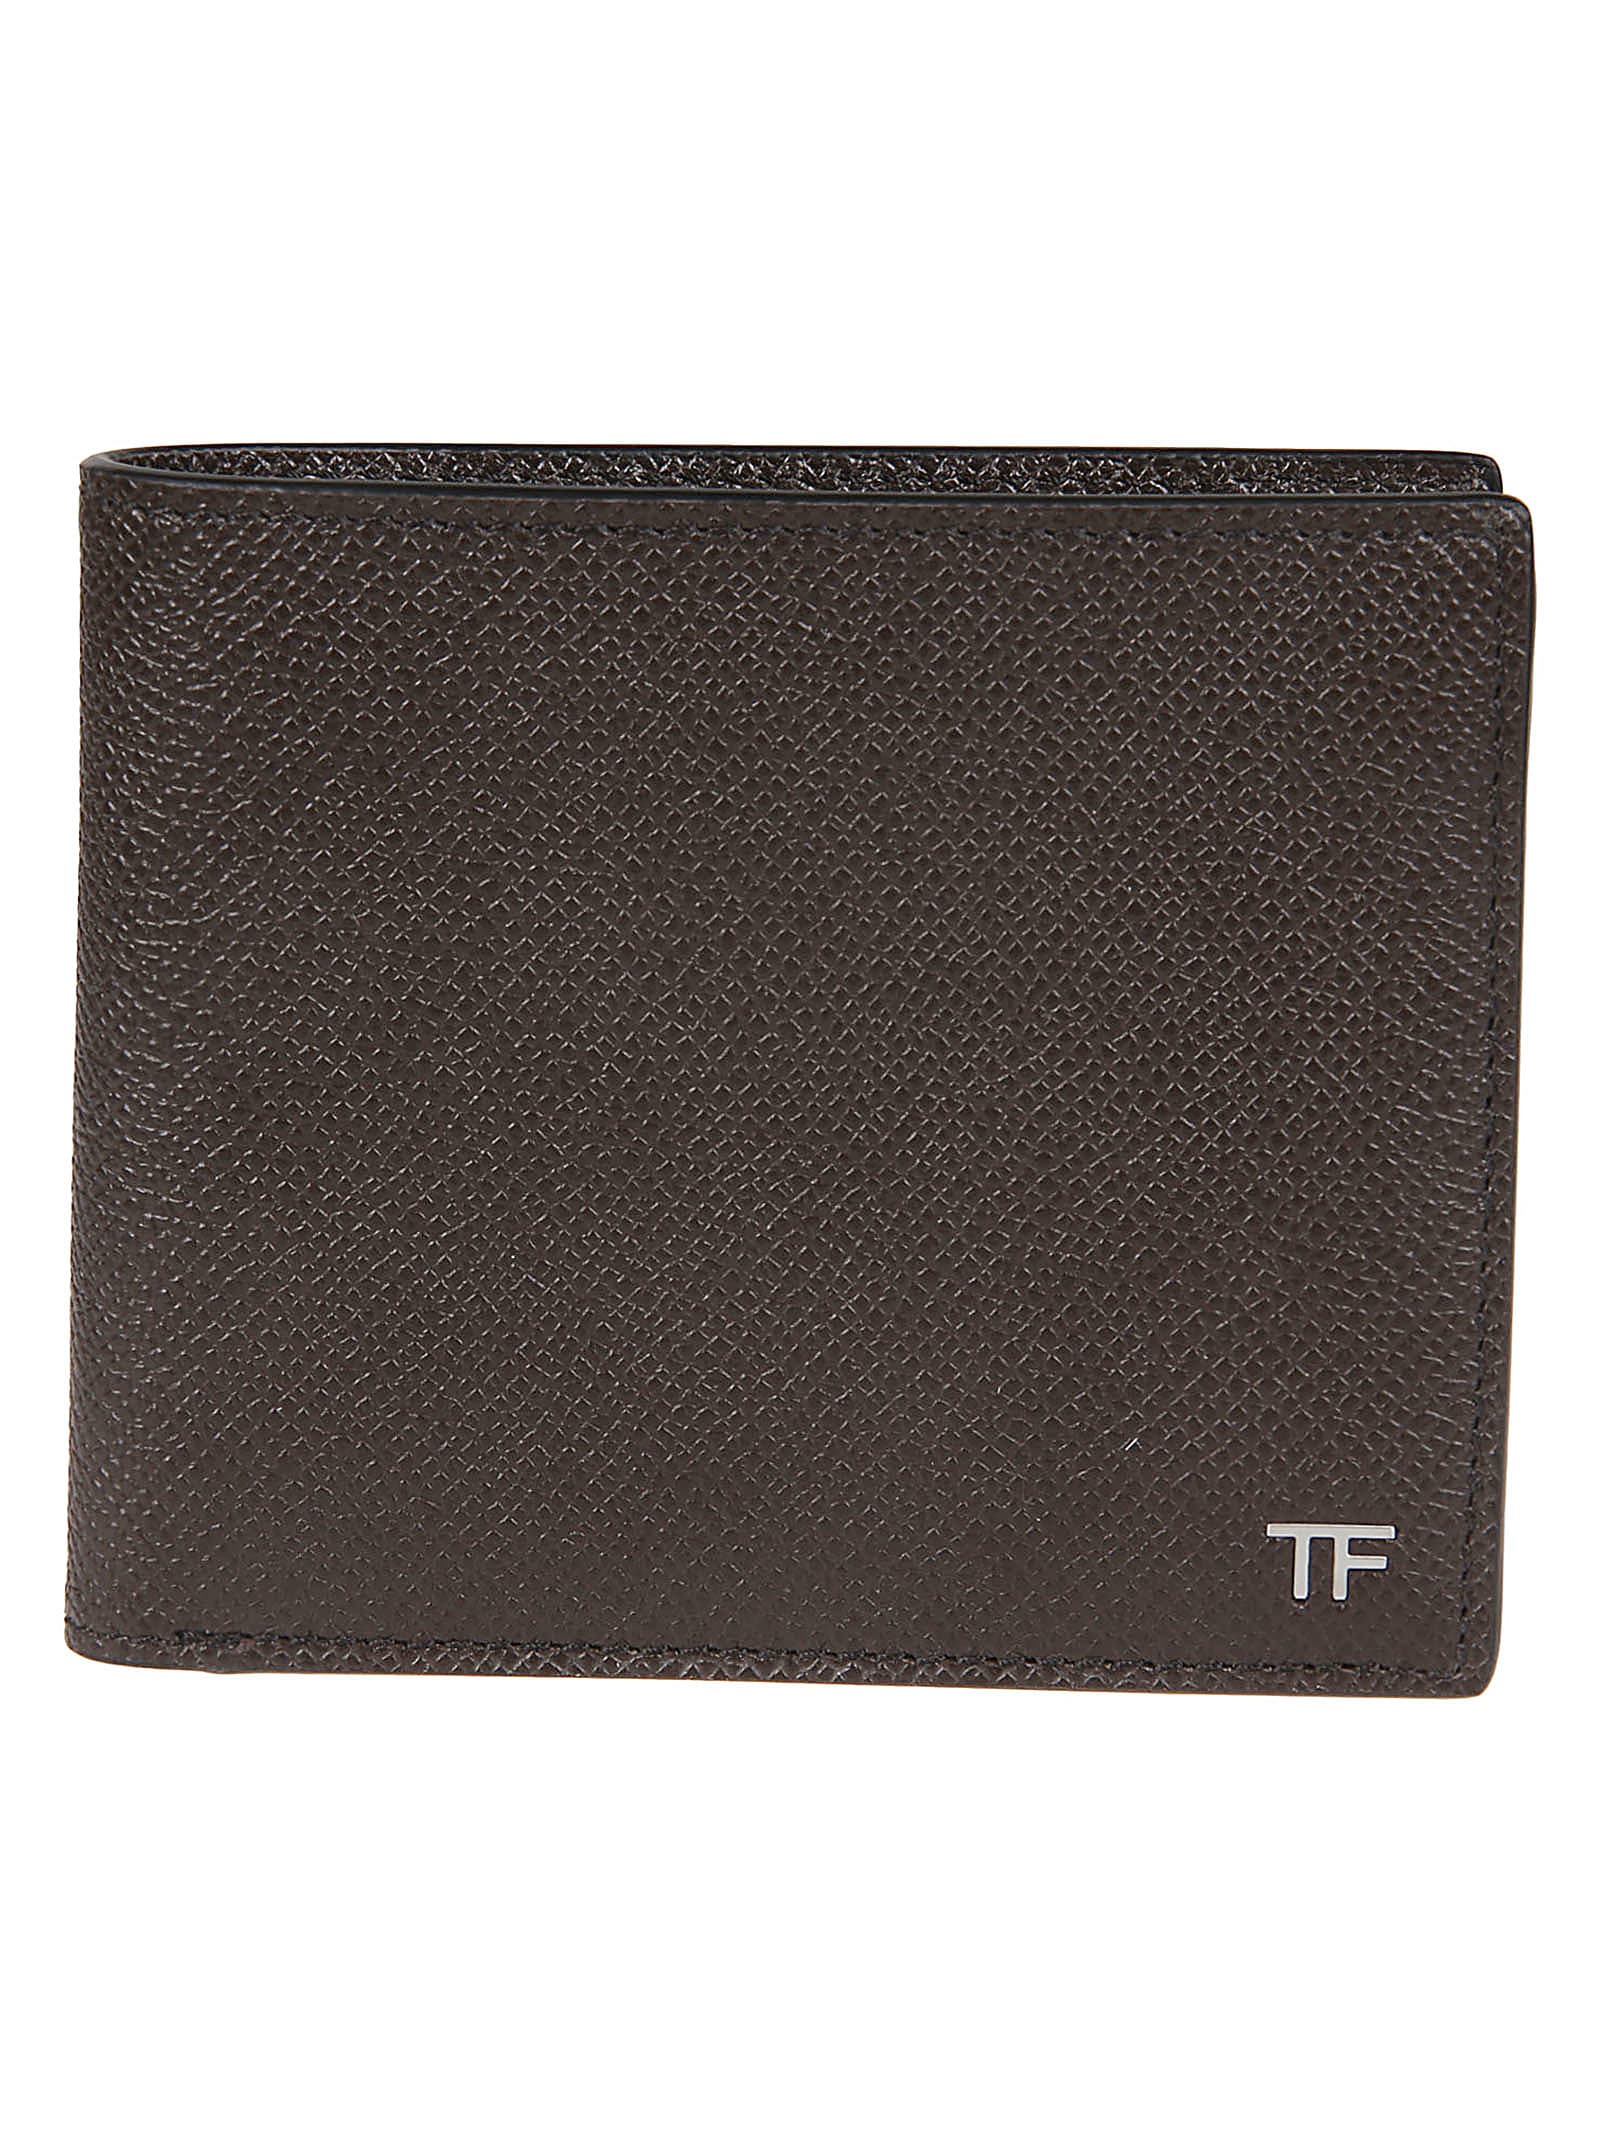 Tom Ford Classic Bifold Wallet In Chocolate